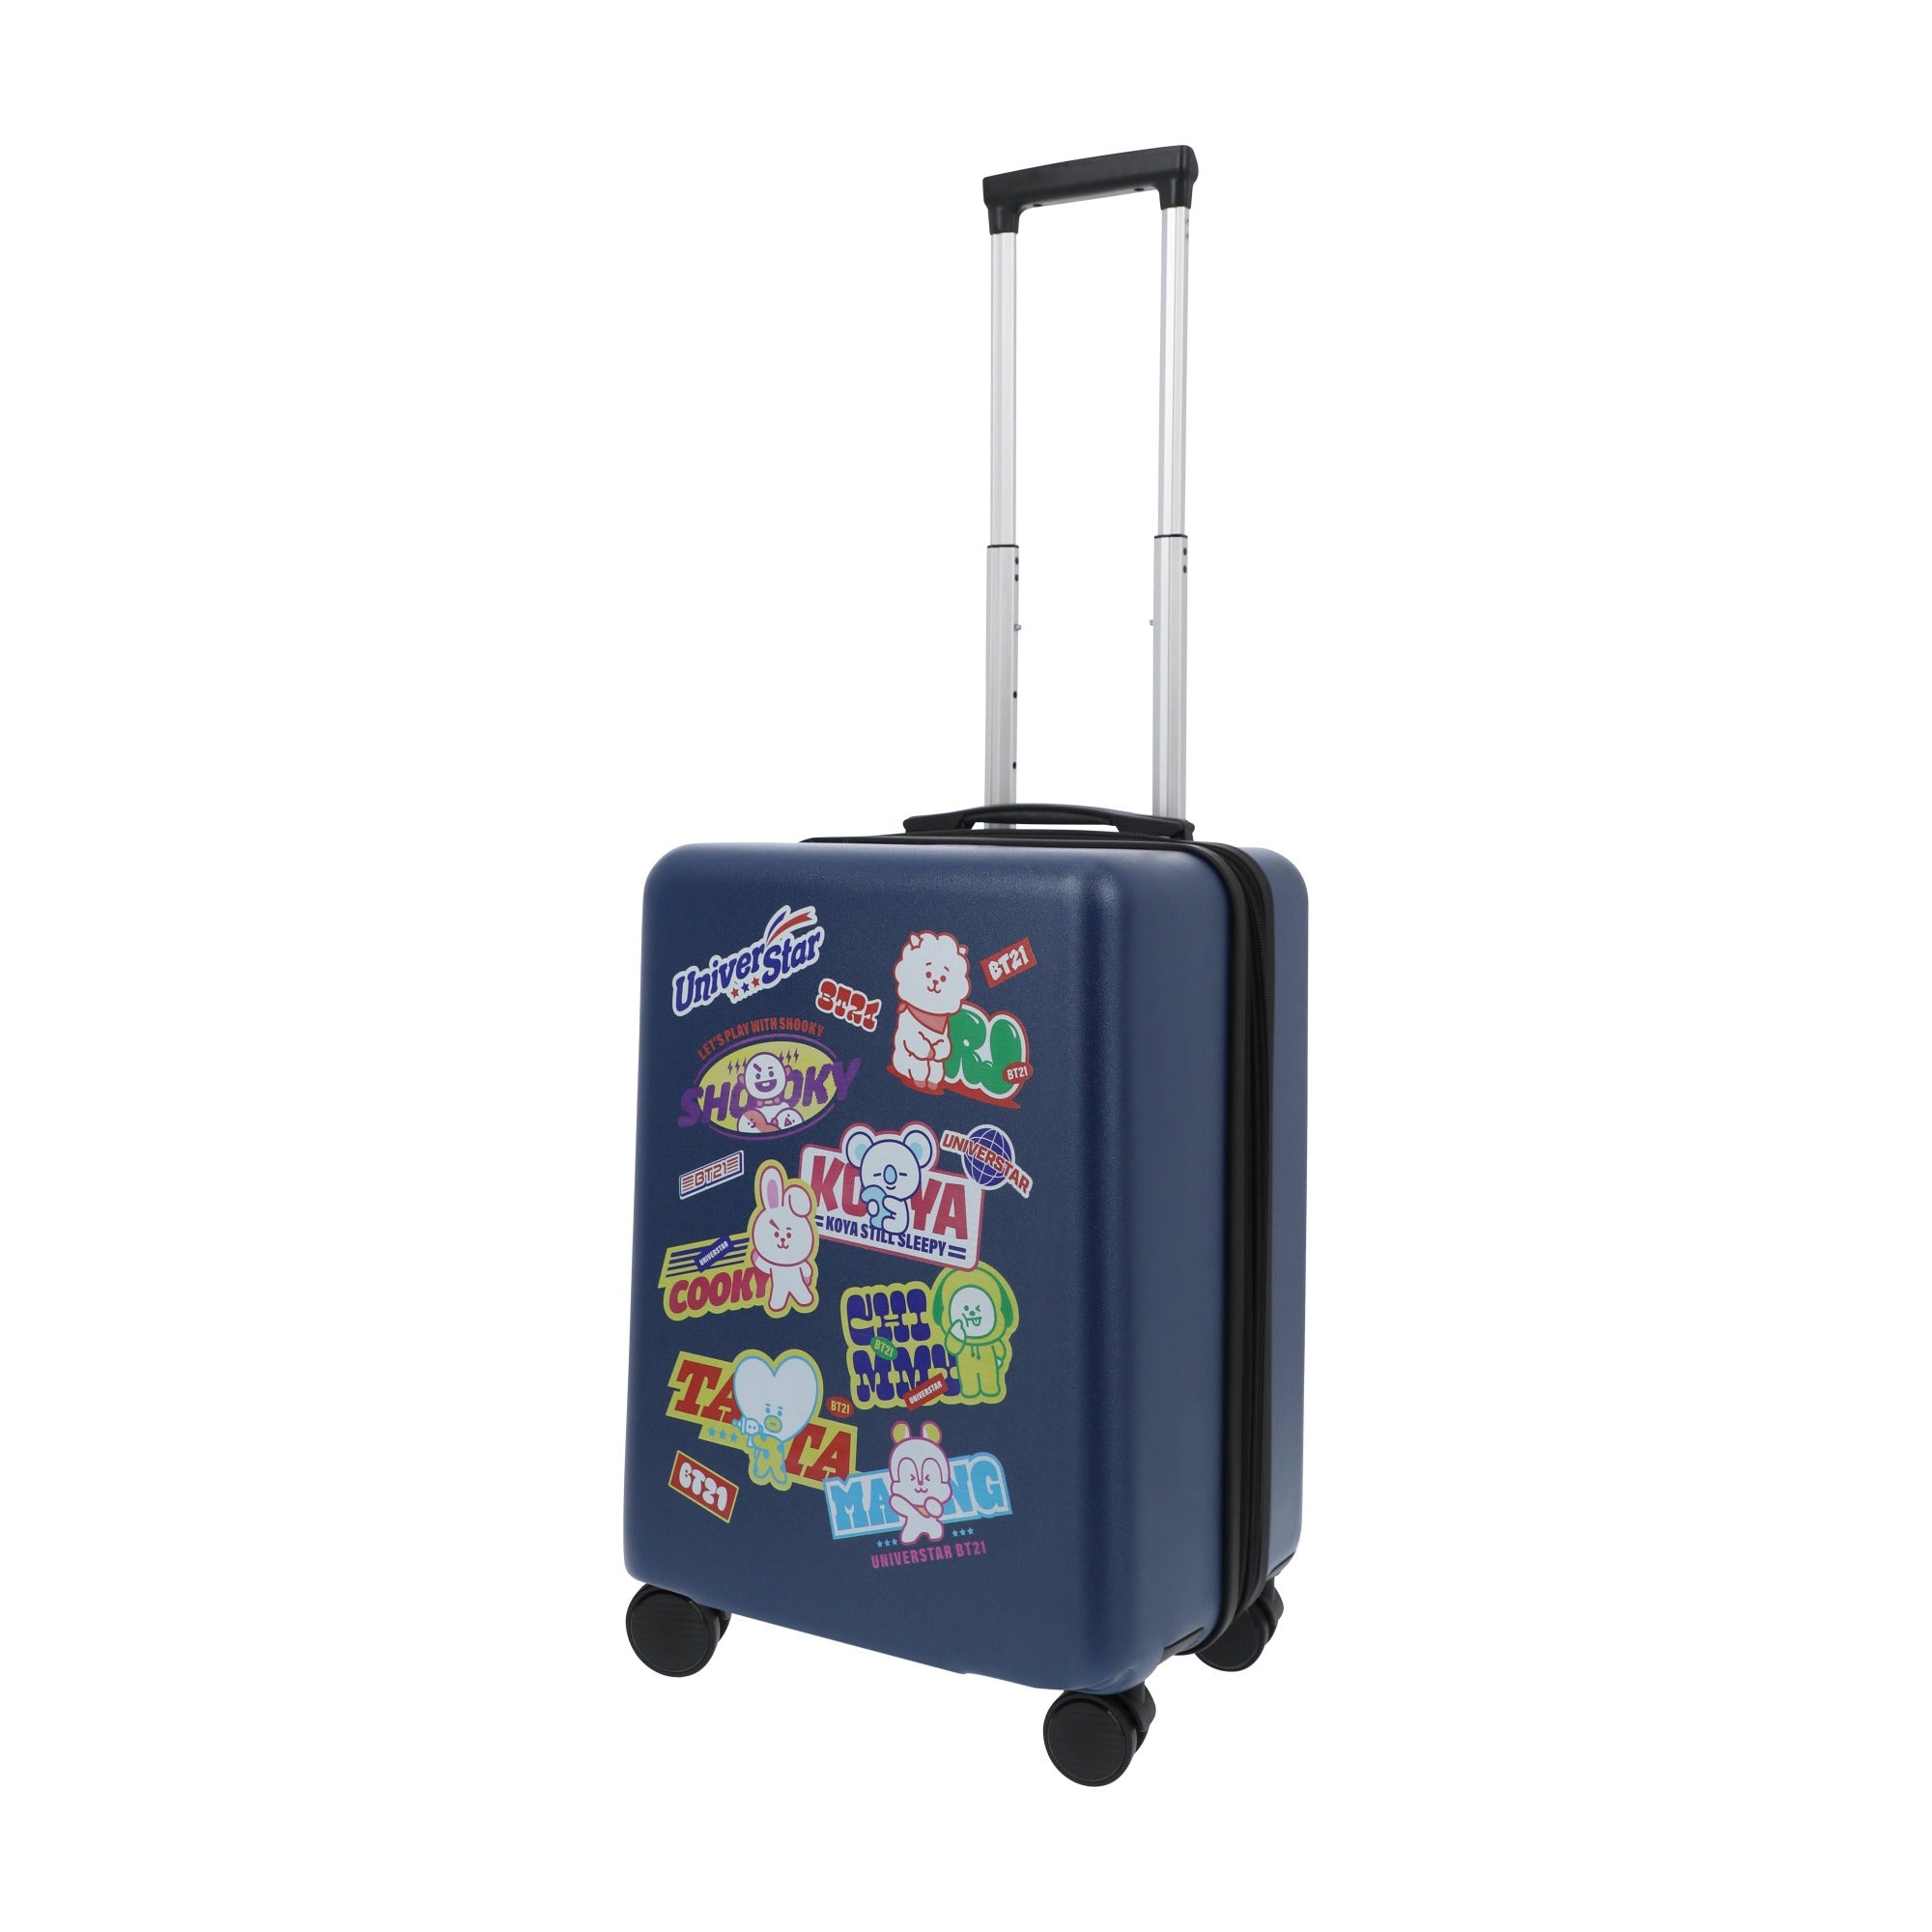 Navy blue BT21 22.5" carry-on spinner suitcase luggage by Ful